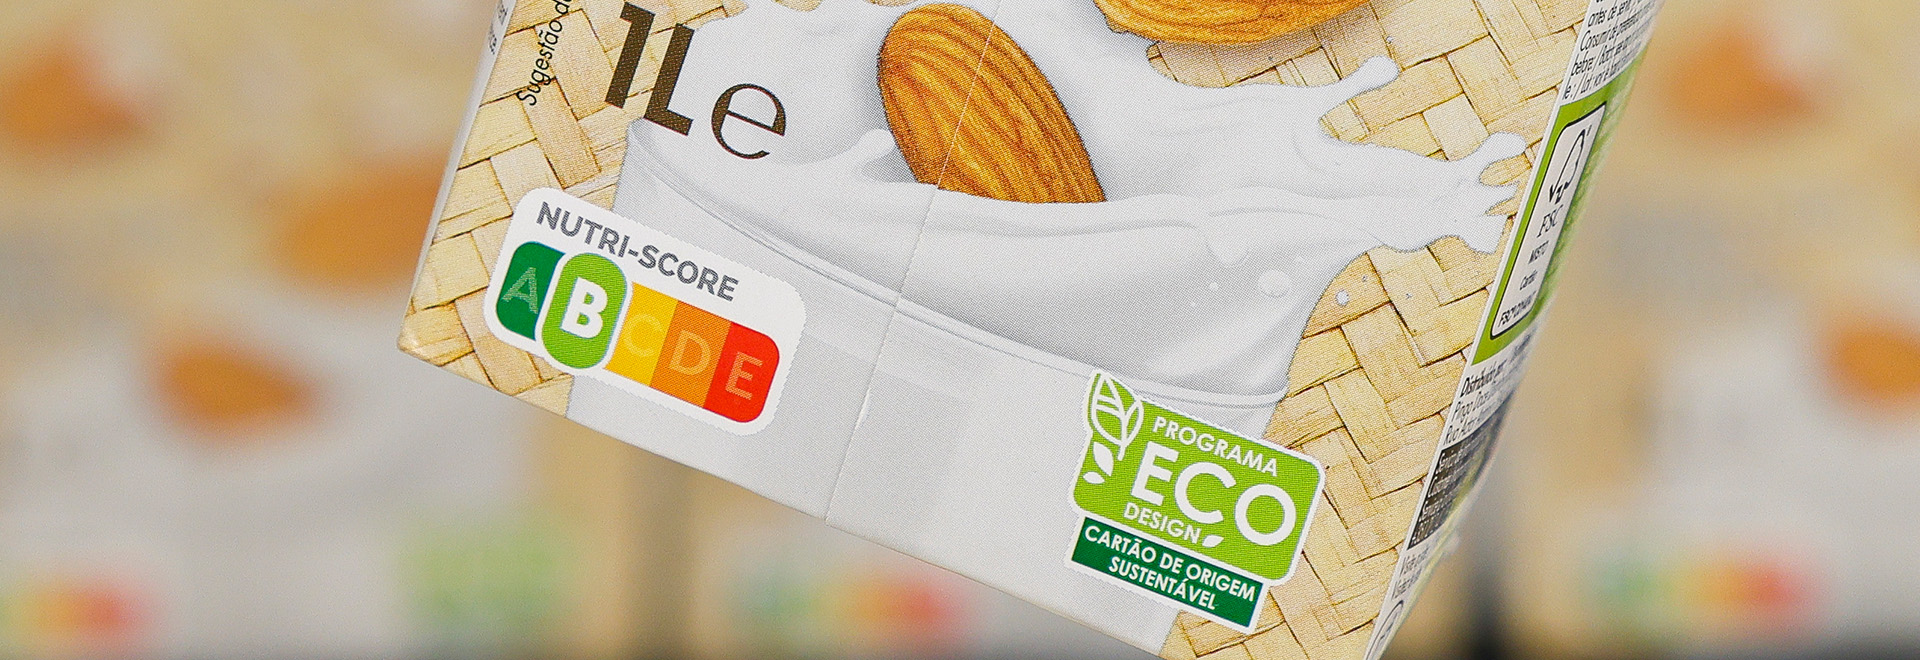 Packaging with the ecodesign logo  (photo)